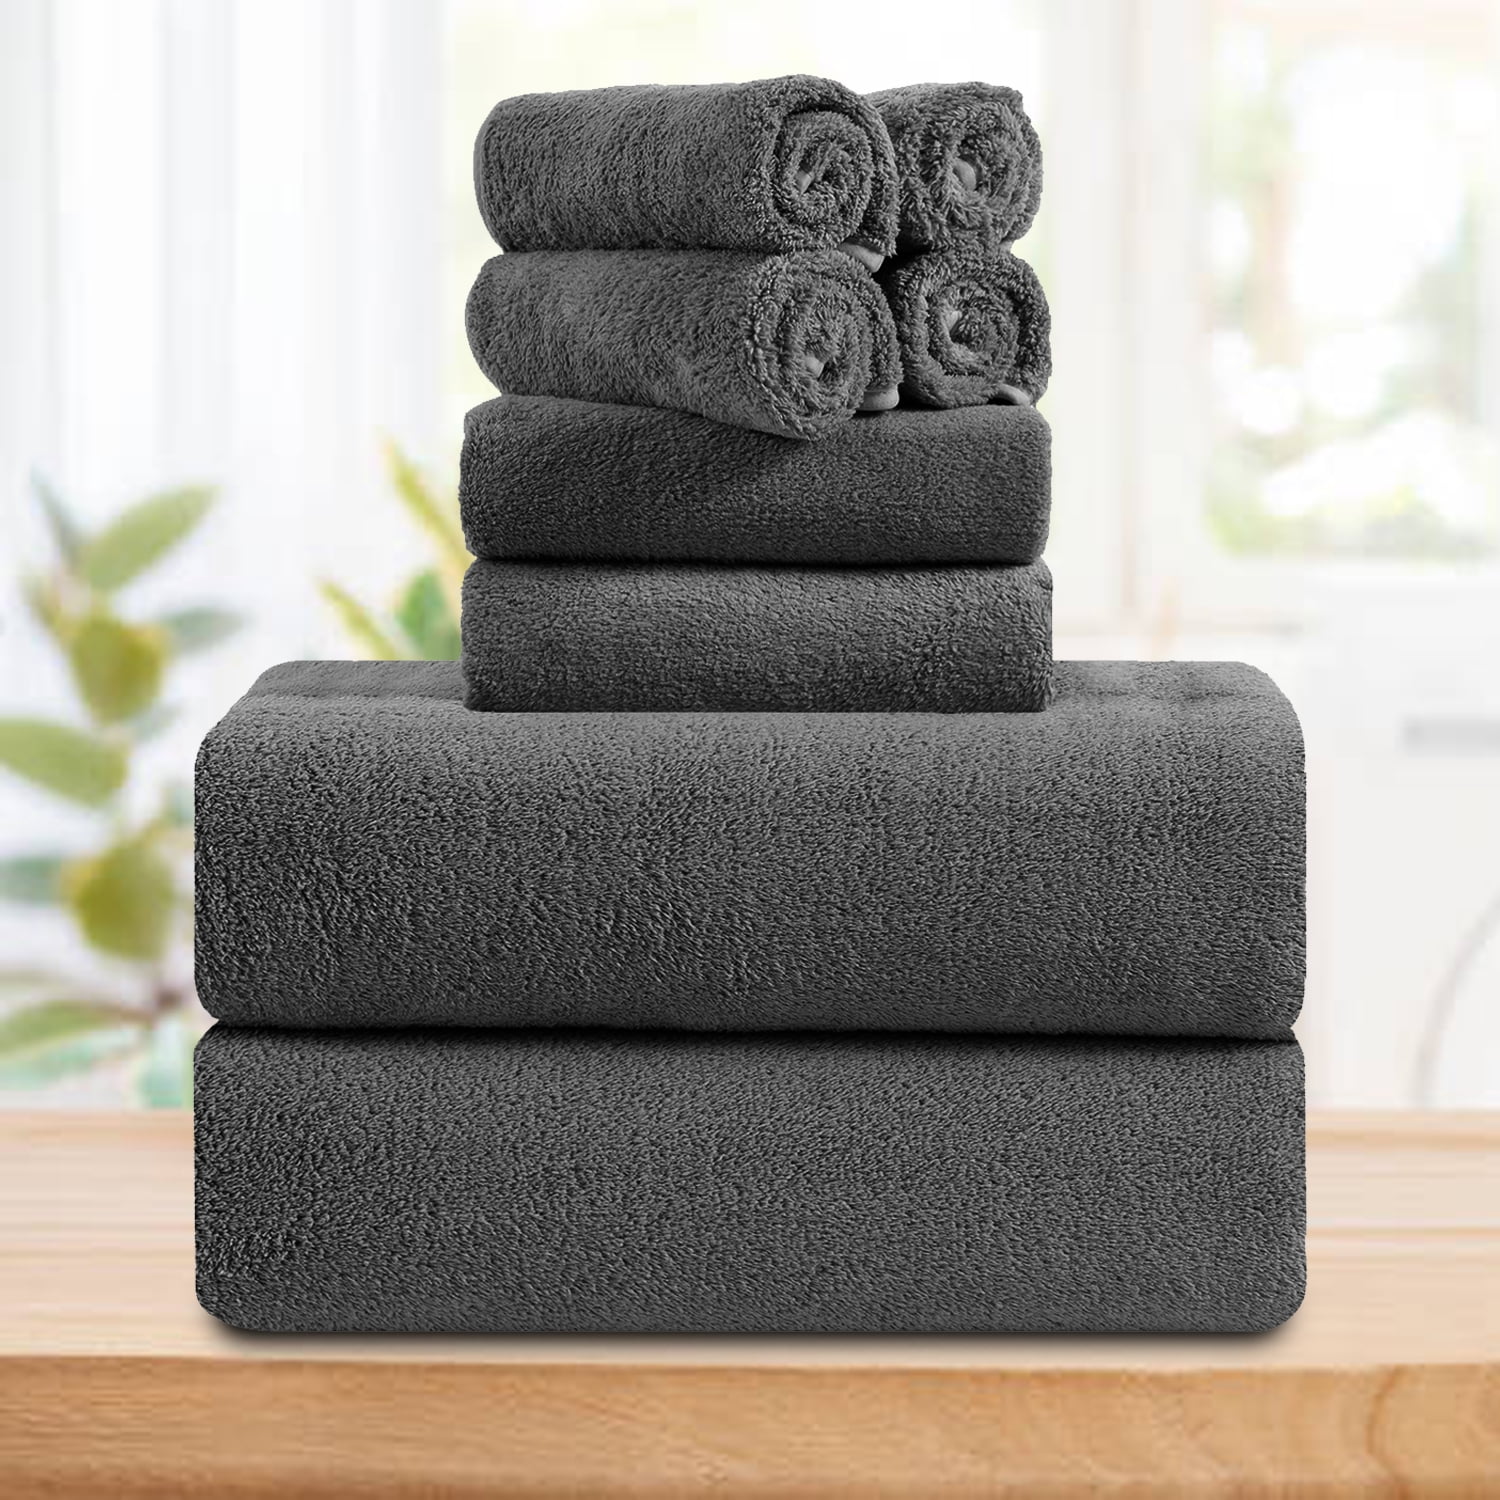 3 Piece Set Oversized Bath Sheet Towels (27 x 55 in/70*140cm) Ultra Soft Large  Bath Towel Set Thick Cozy Quick Dry Bathroom Towels Hotel Luxurious Towels